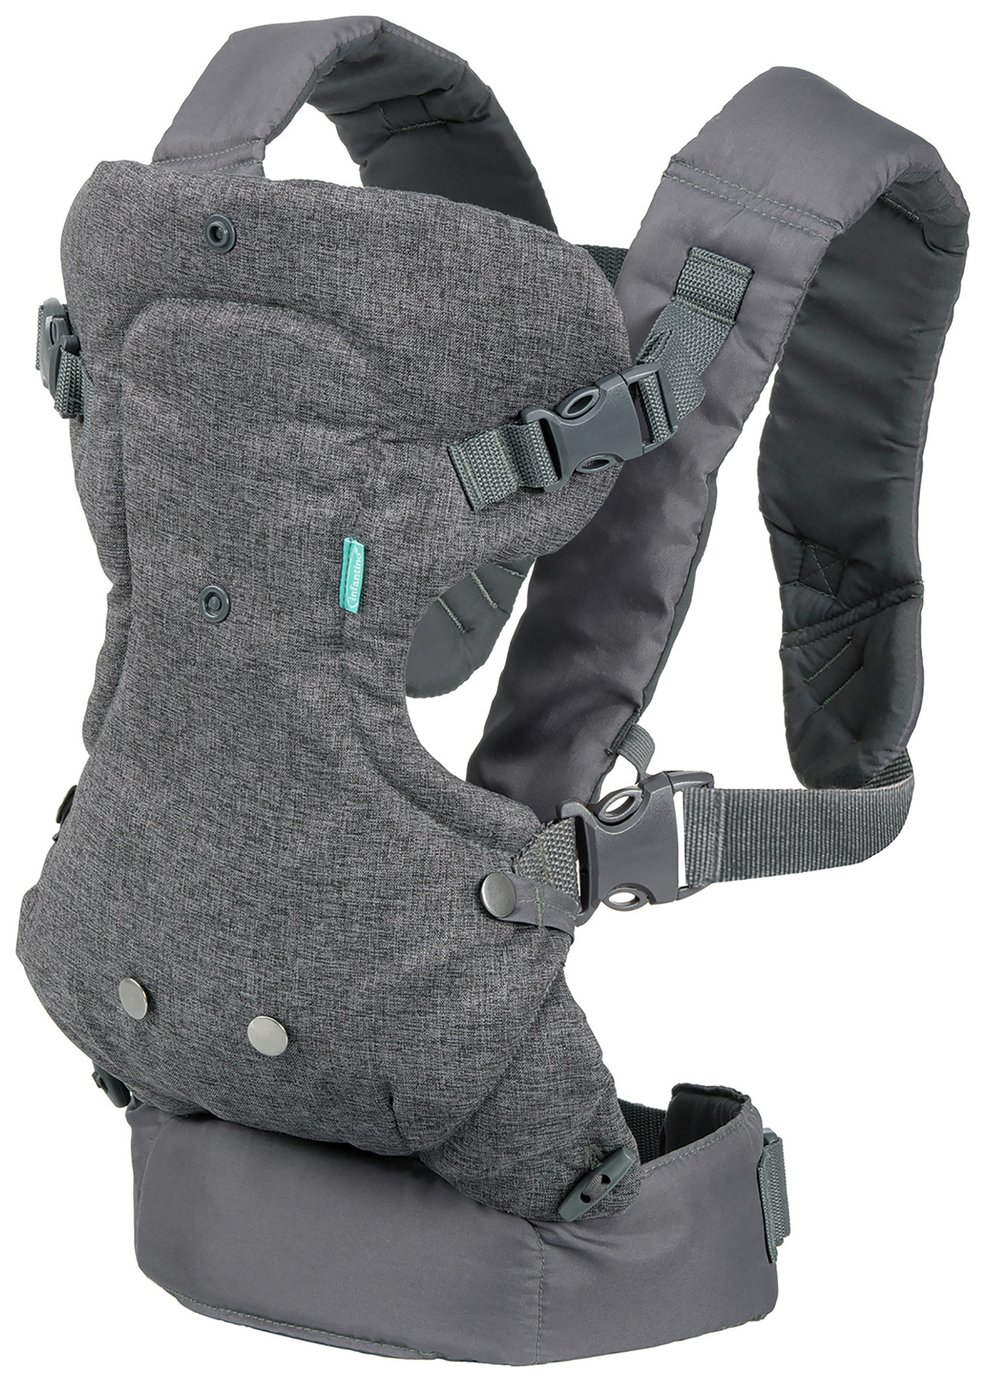 Infantino Flip Ergo 4 in 1 Baby Carrier Review